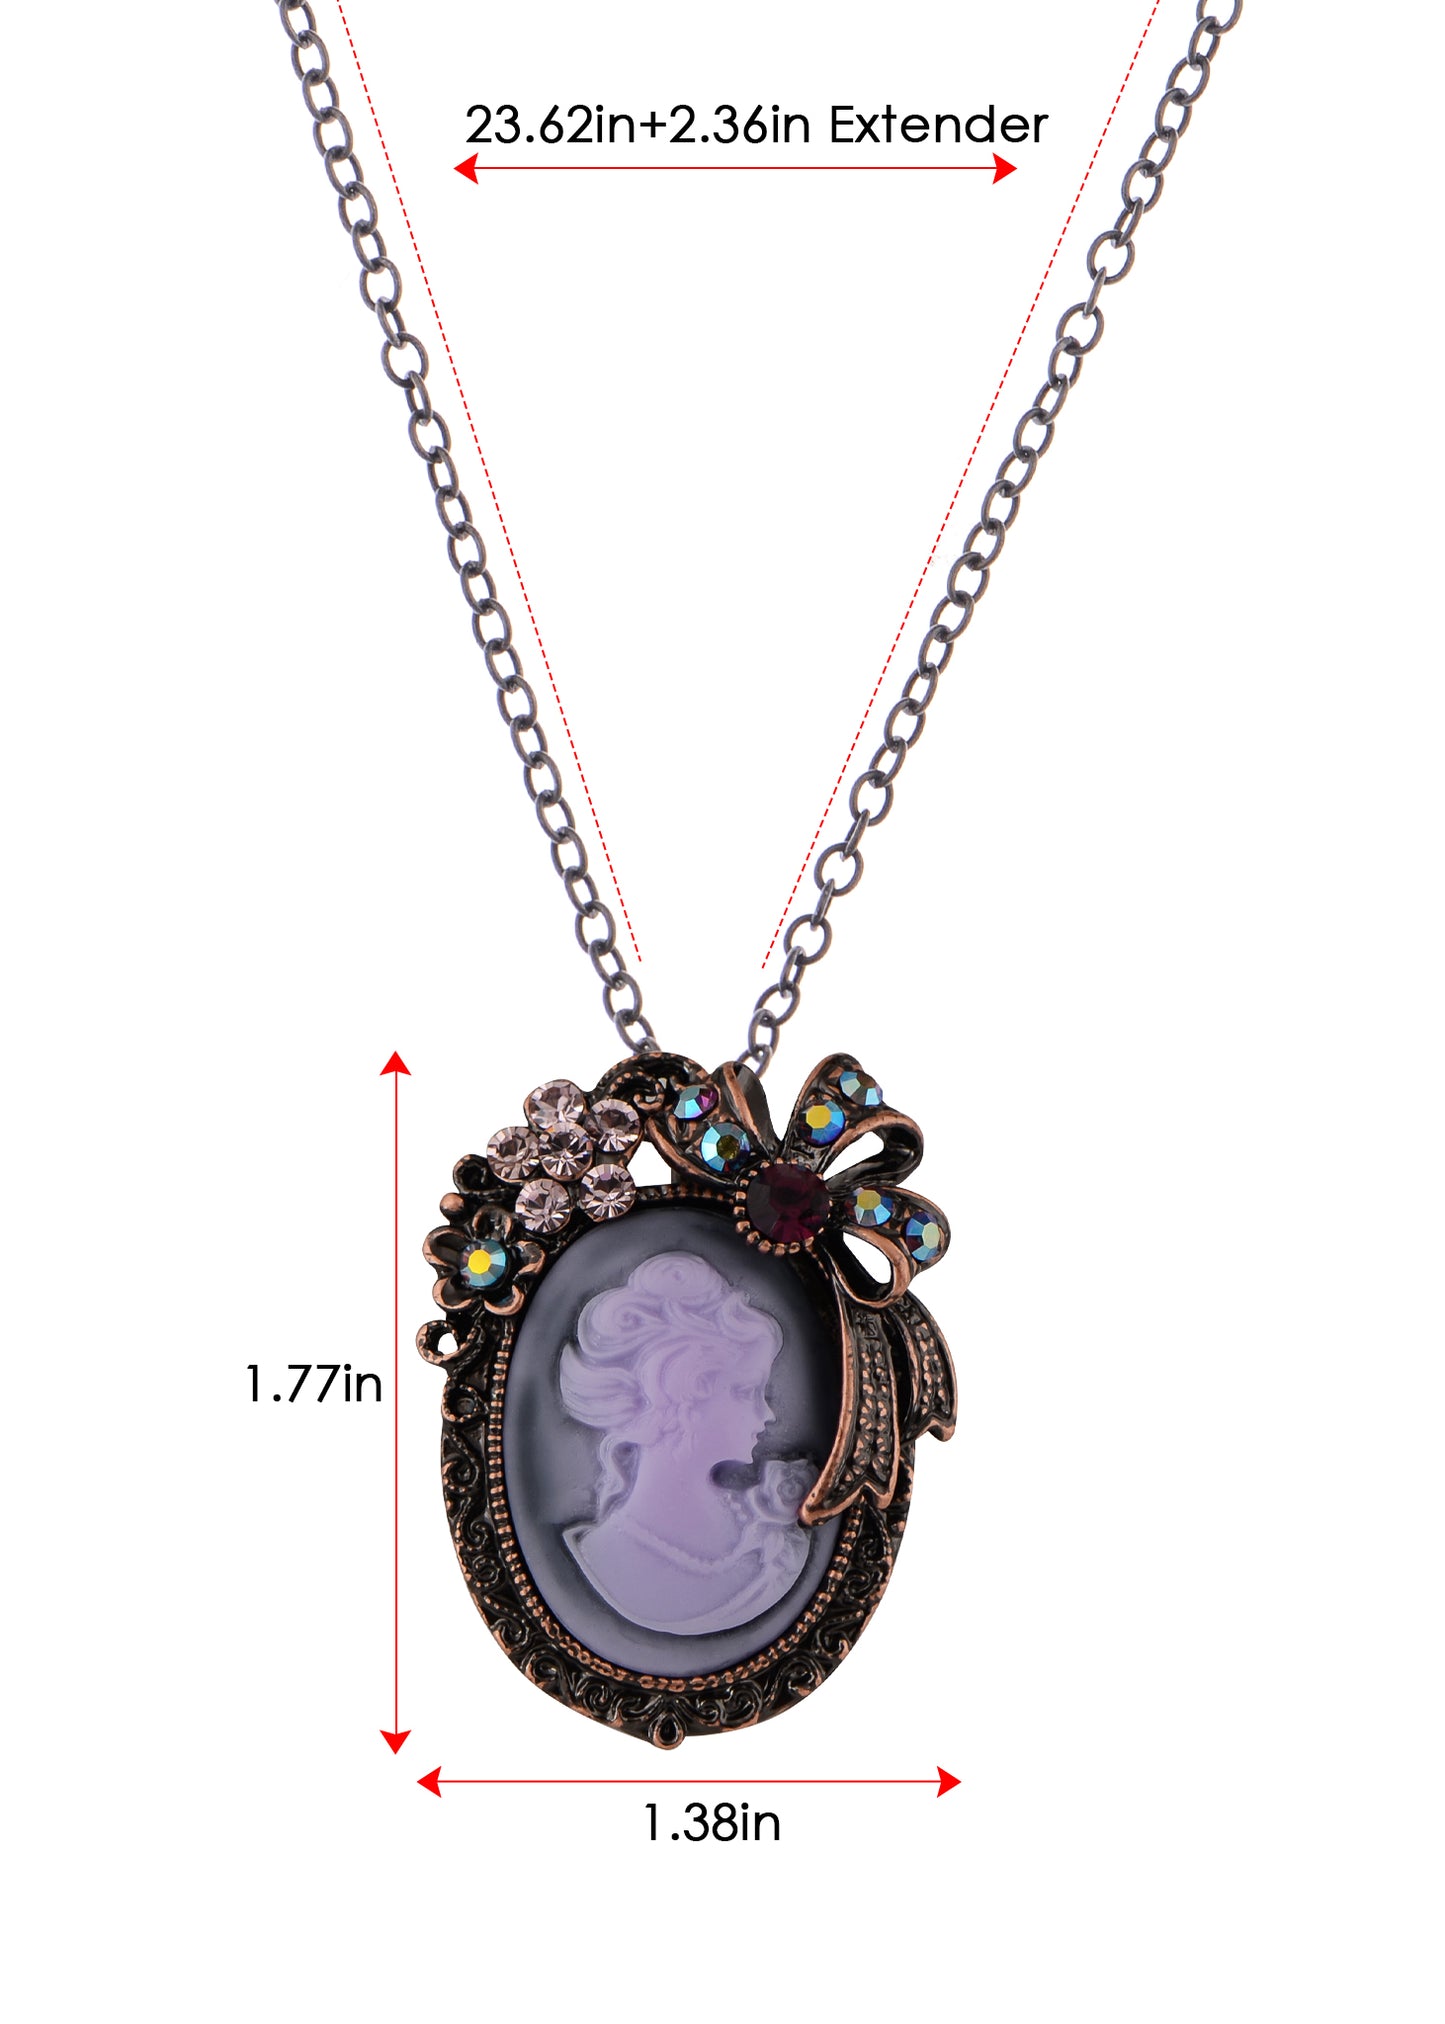 Alilang Vintage Inspired Crystal Rhinestones Victorian Lady Cameo Pendant Necklace Maiden Flower Ribbon Bow Brooch Pin